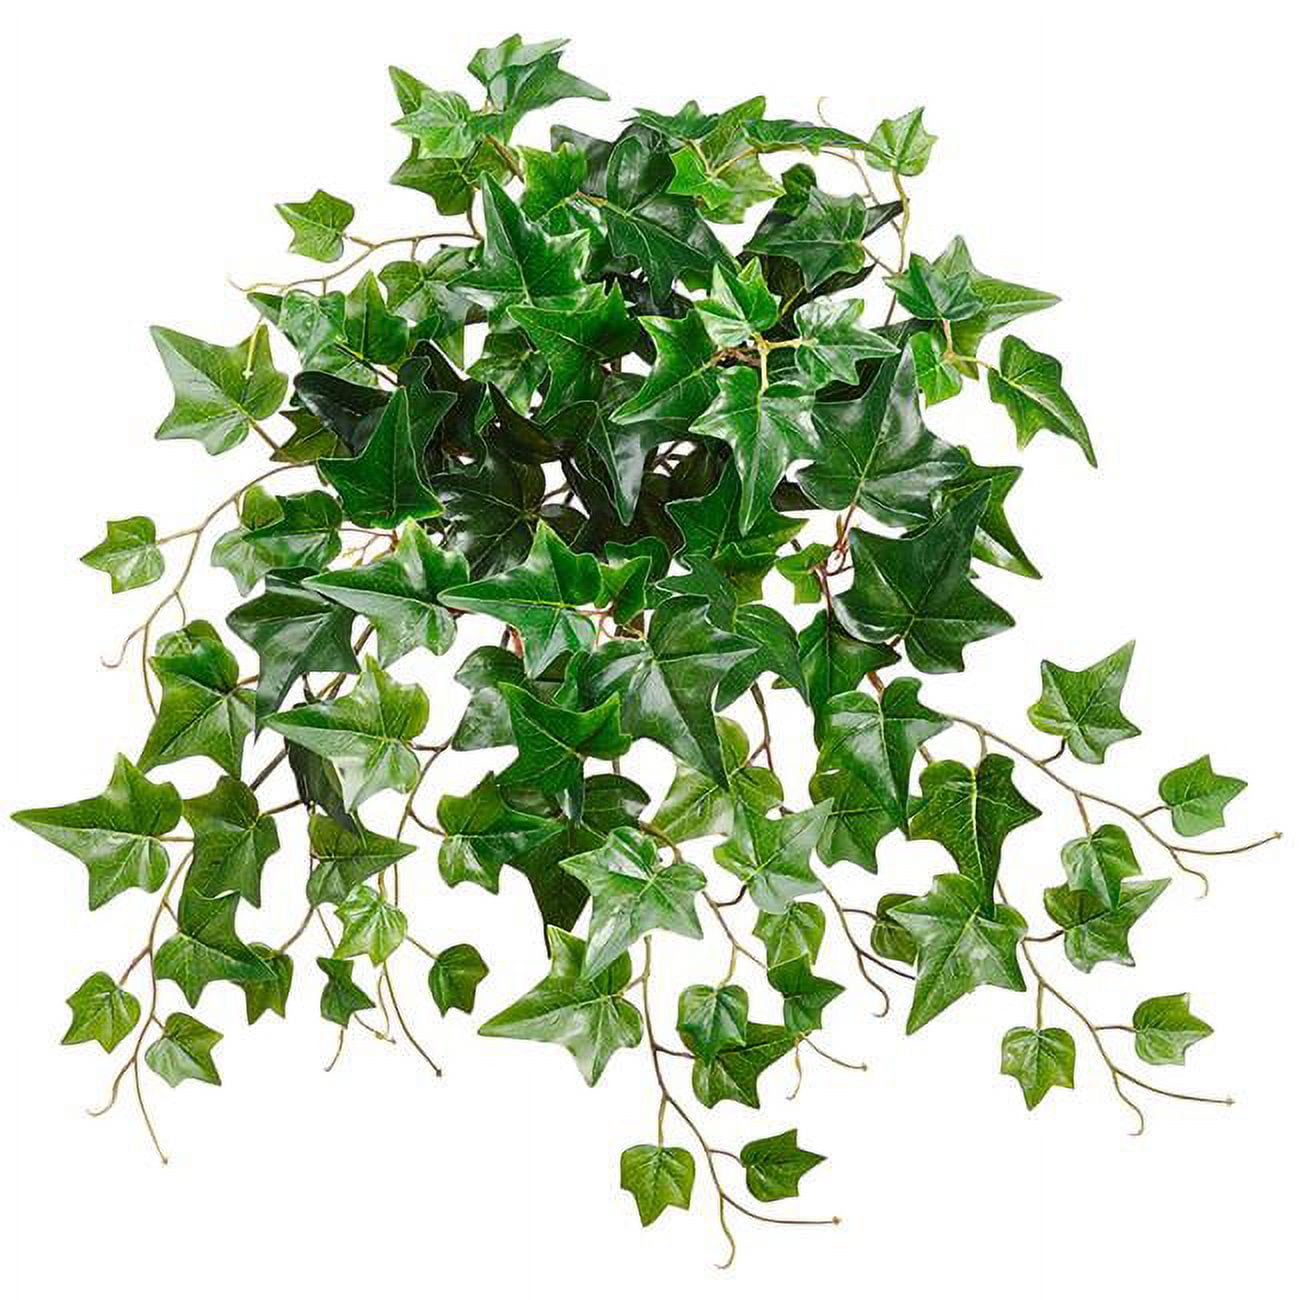 Picture of AllState Floral PBI120-GR 20 in. UV Protected Ivy Bush - Green - Pack of 12